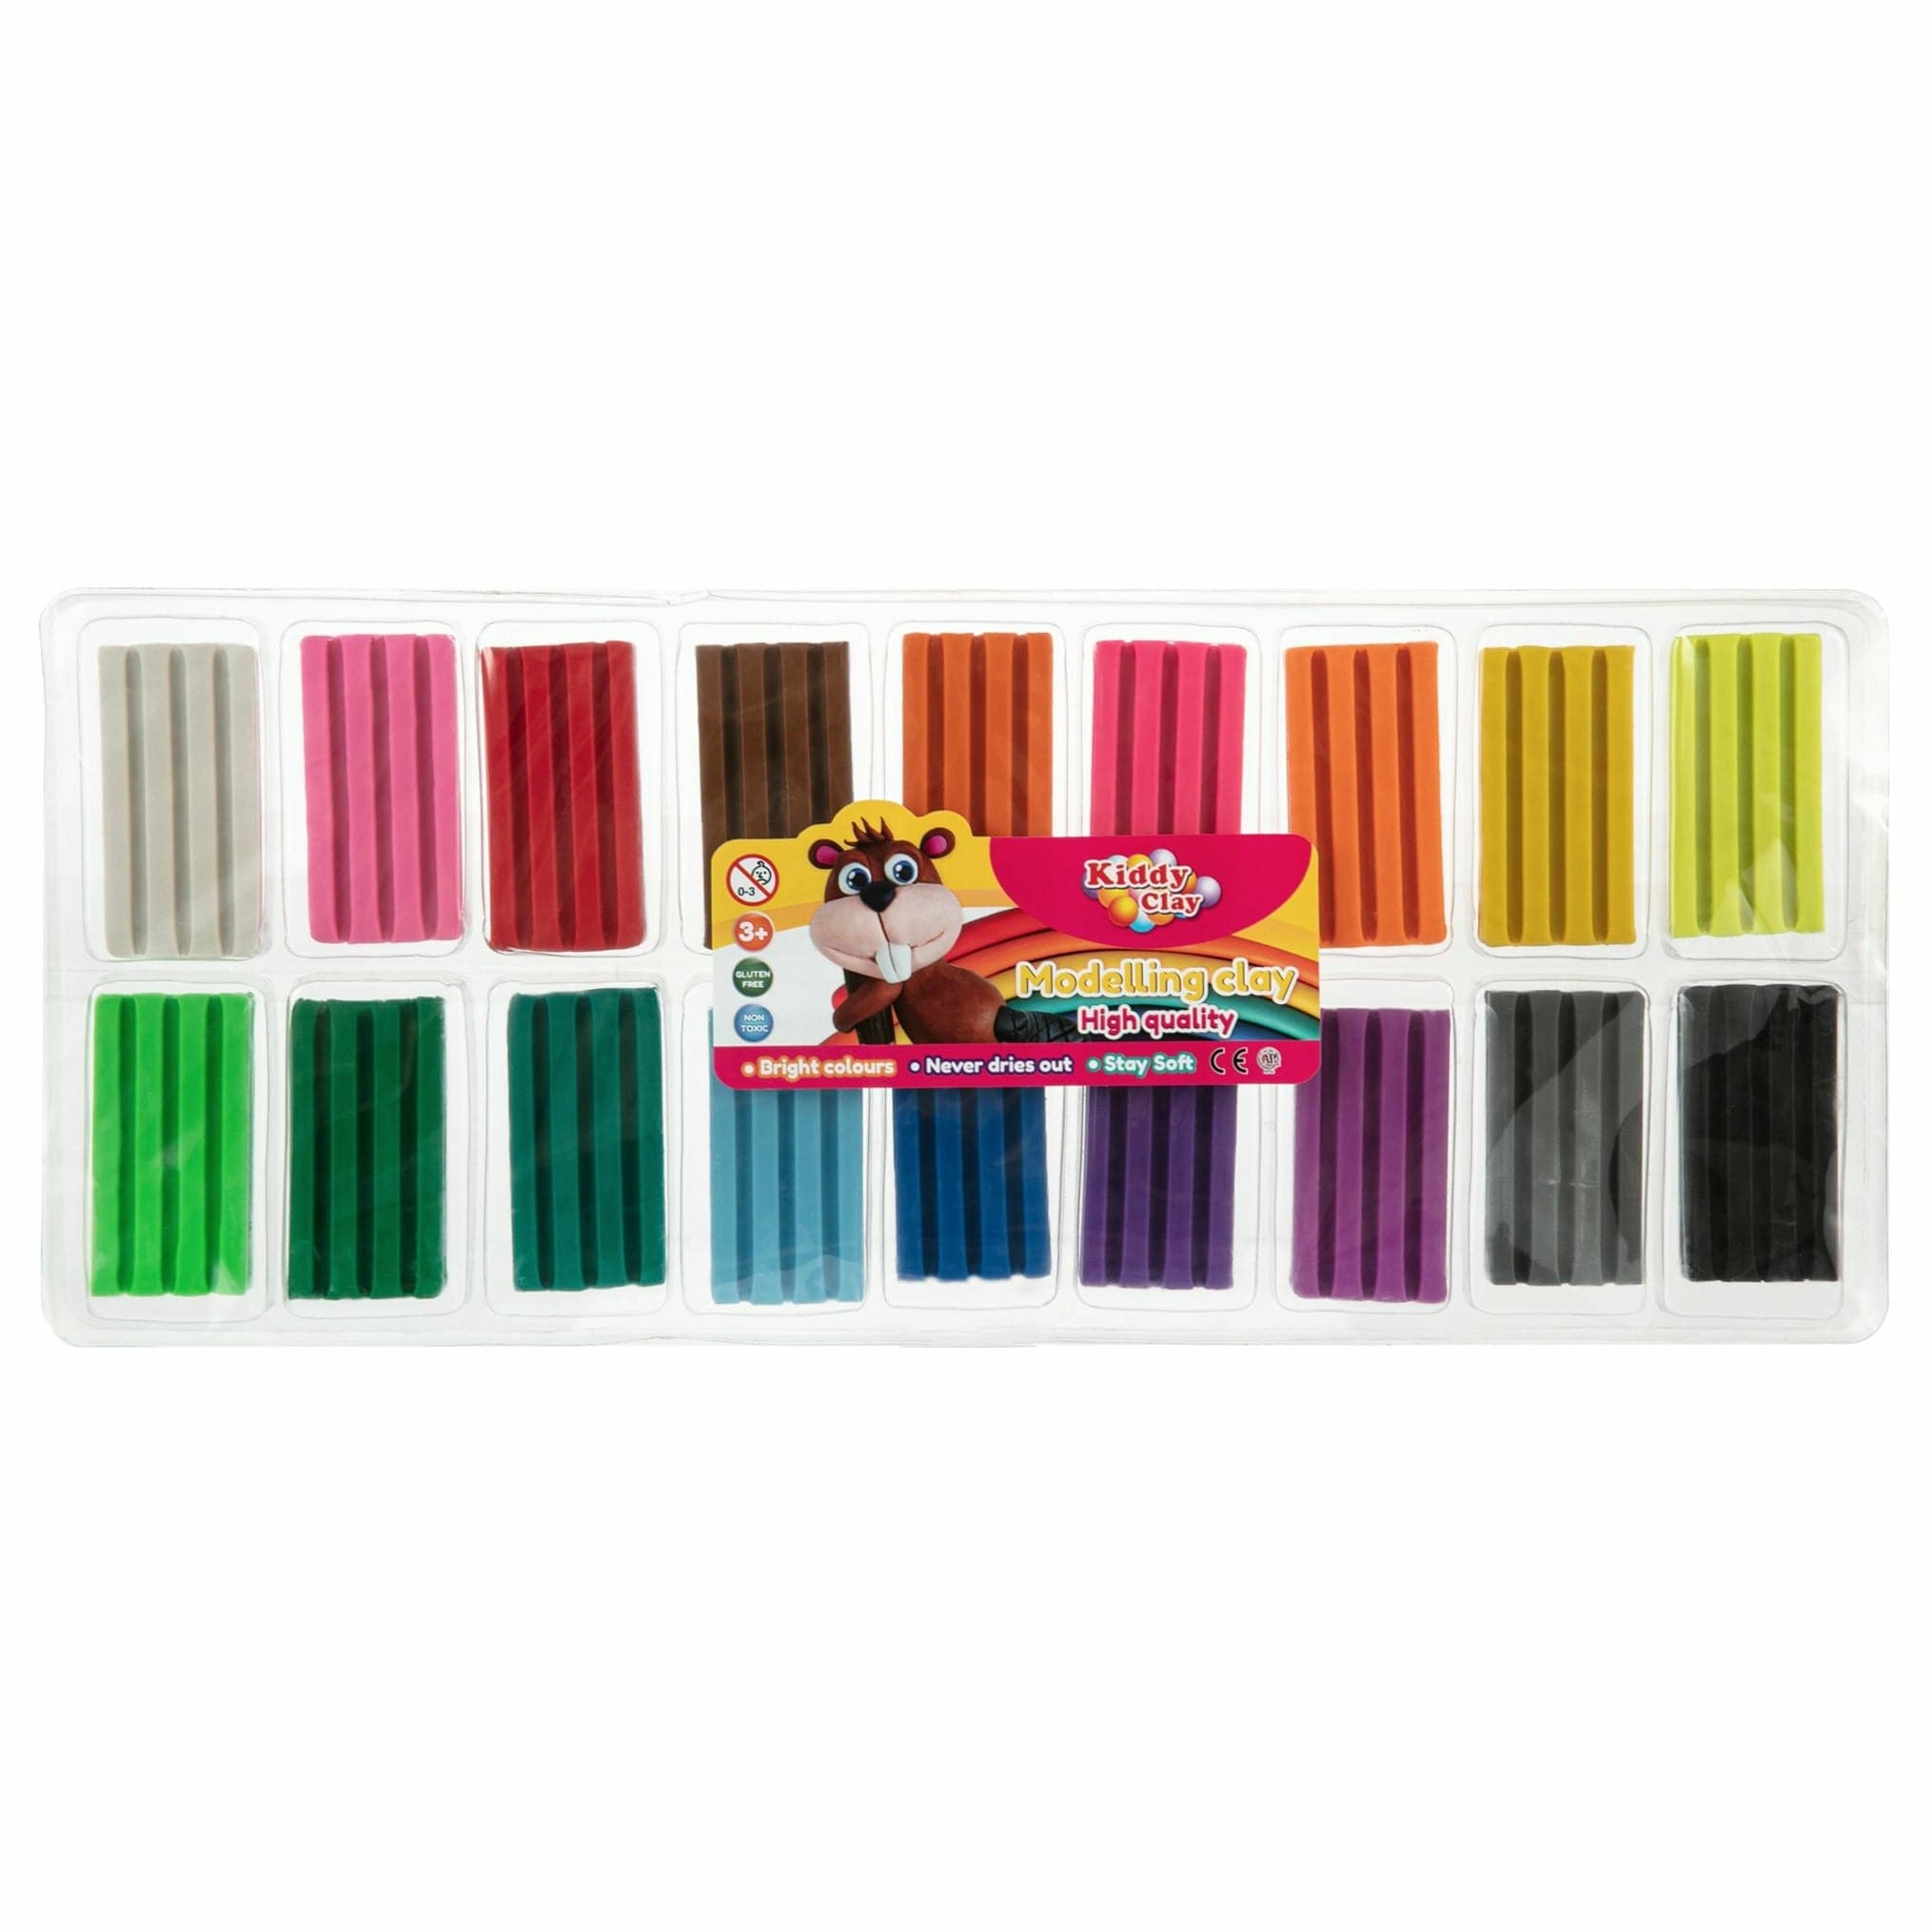 Image of Kiddy Clay Modelling Clay 18 Colours 20g each Total 360G